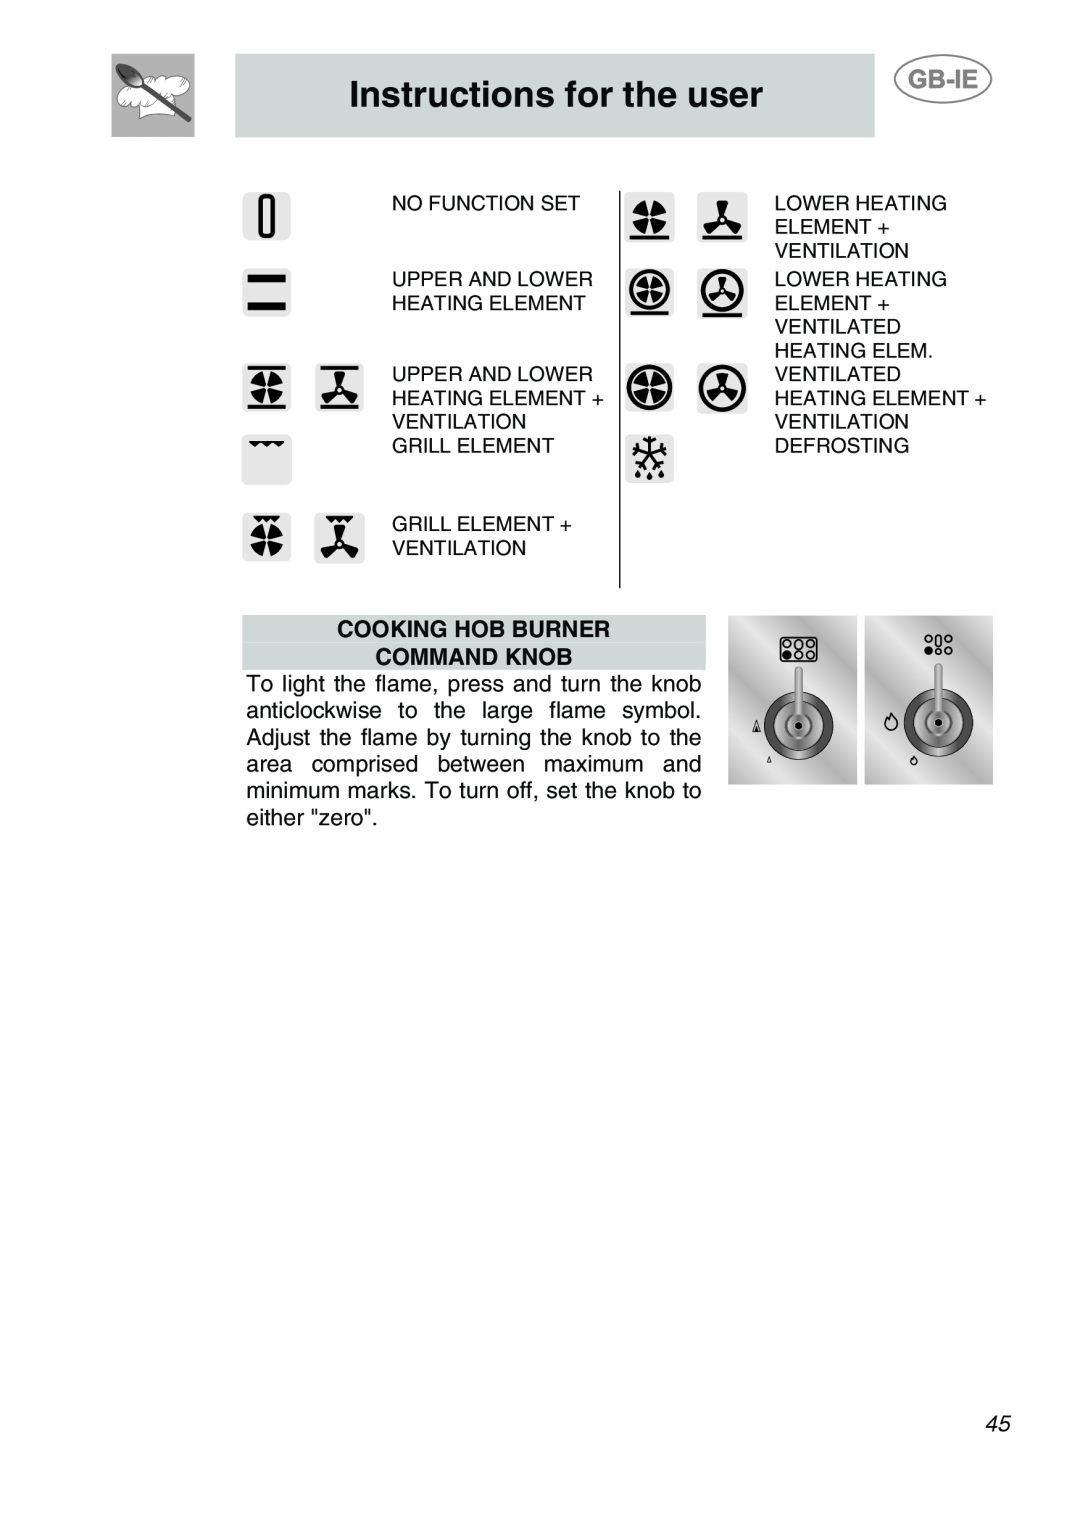 Smeg A1-6 manual Instructions for the user, Cooking Hob Burner Command Knob 